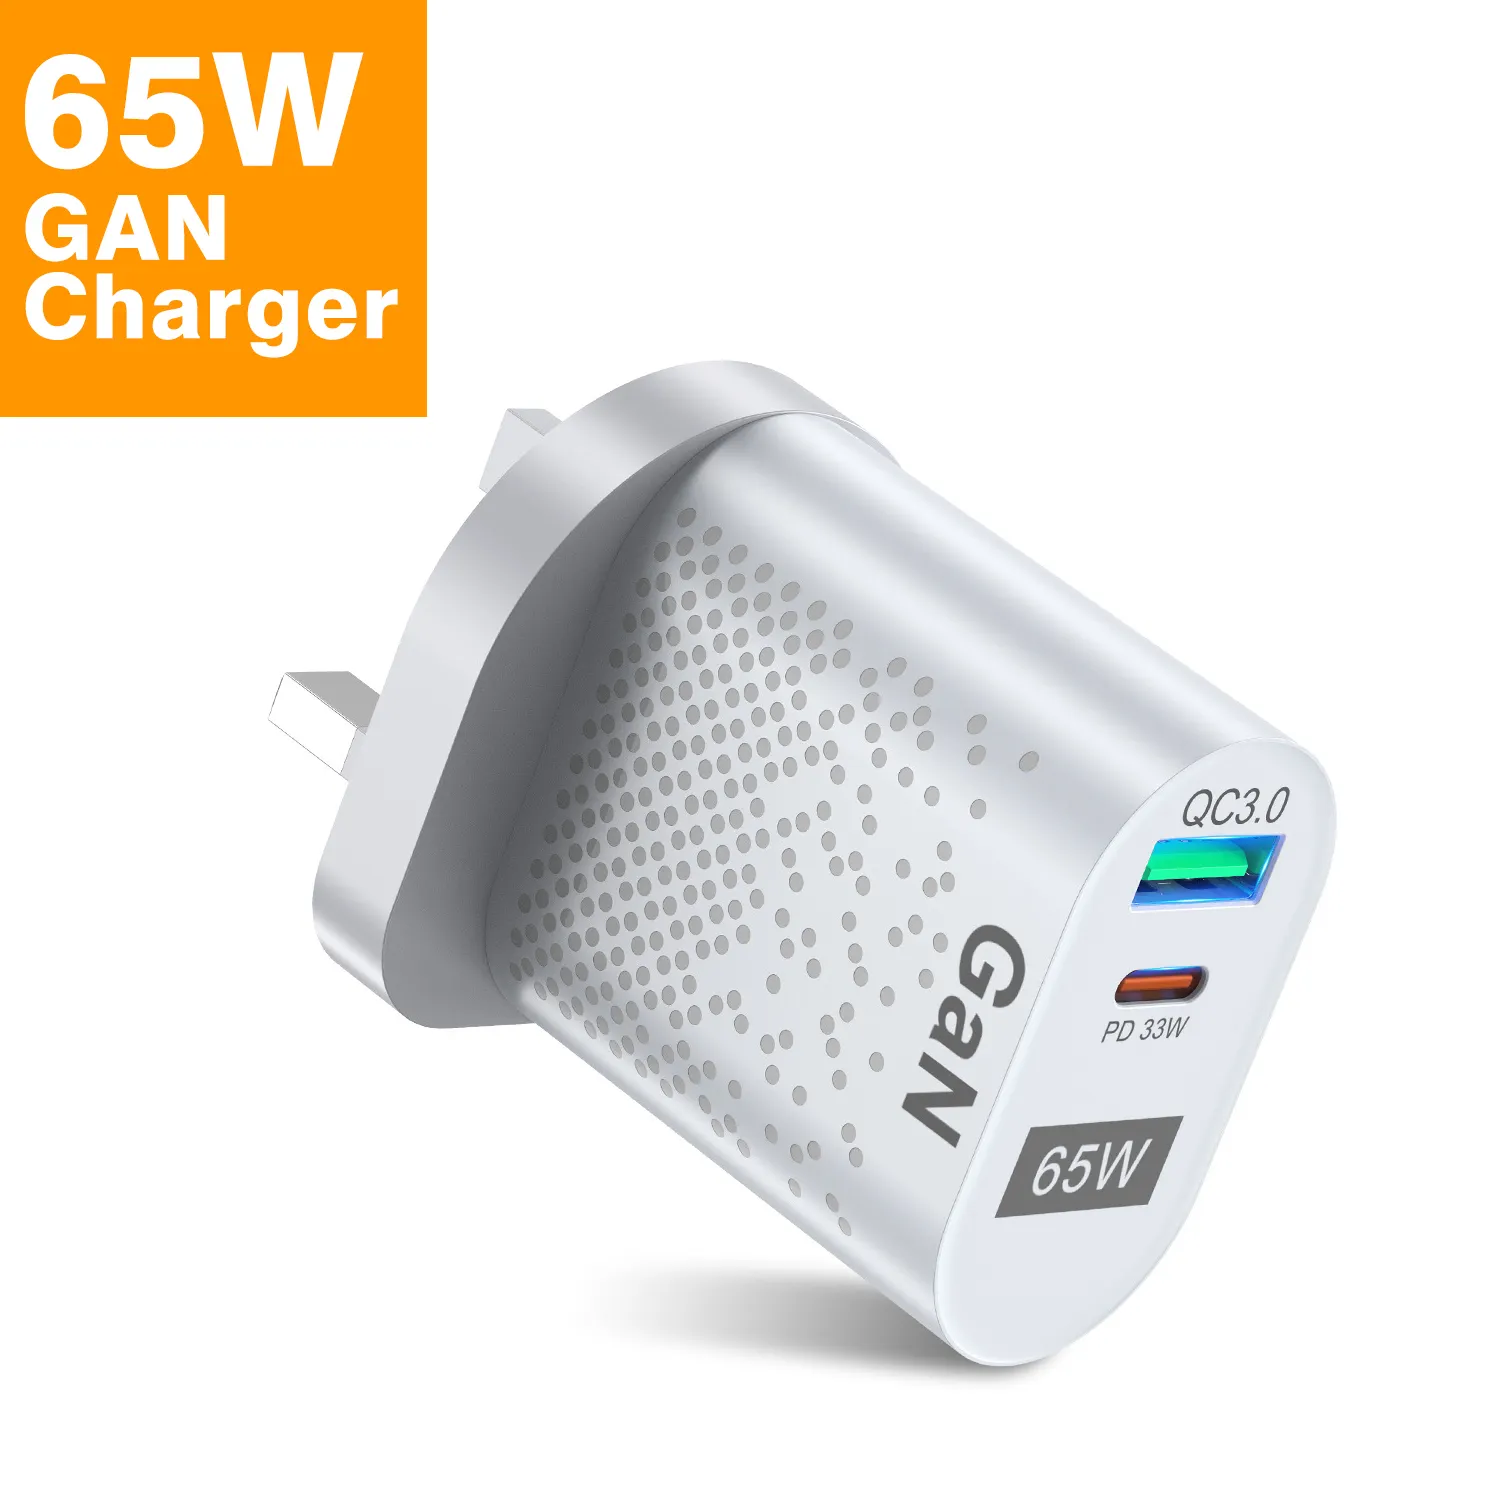 Am azon hot 65W PD GaN charger 2 Ports Quick USB A C Charger Mobile Phone For iPhone Type C QC3.0 Fast Wall Charger For Samsung